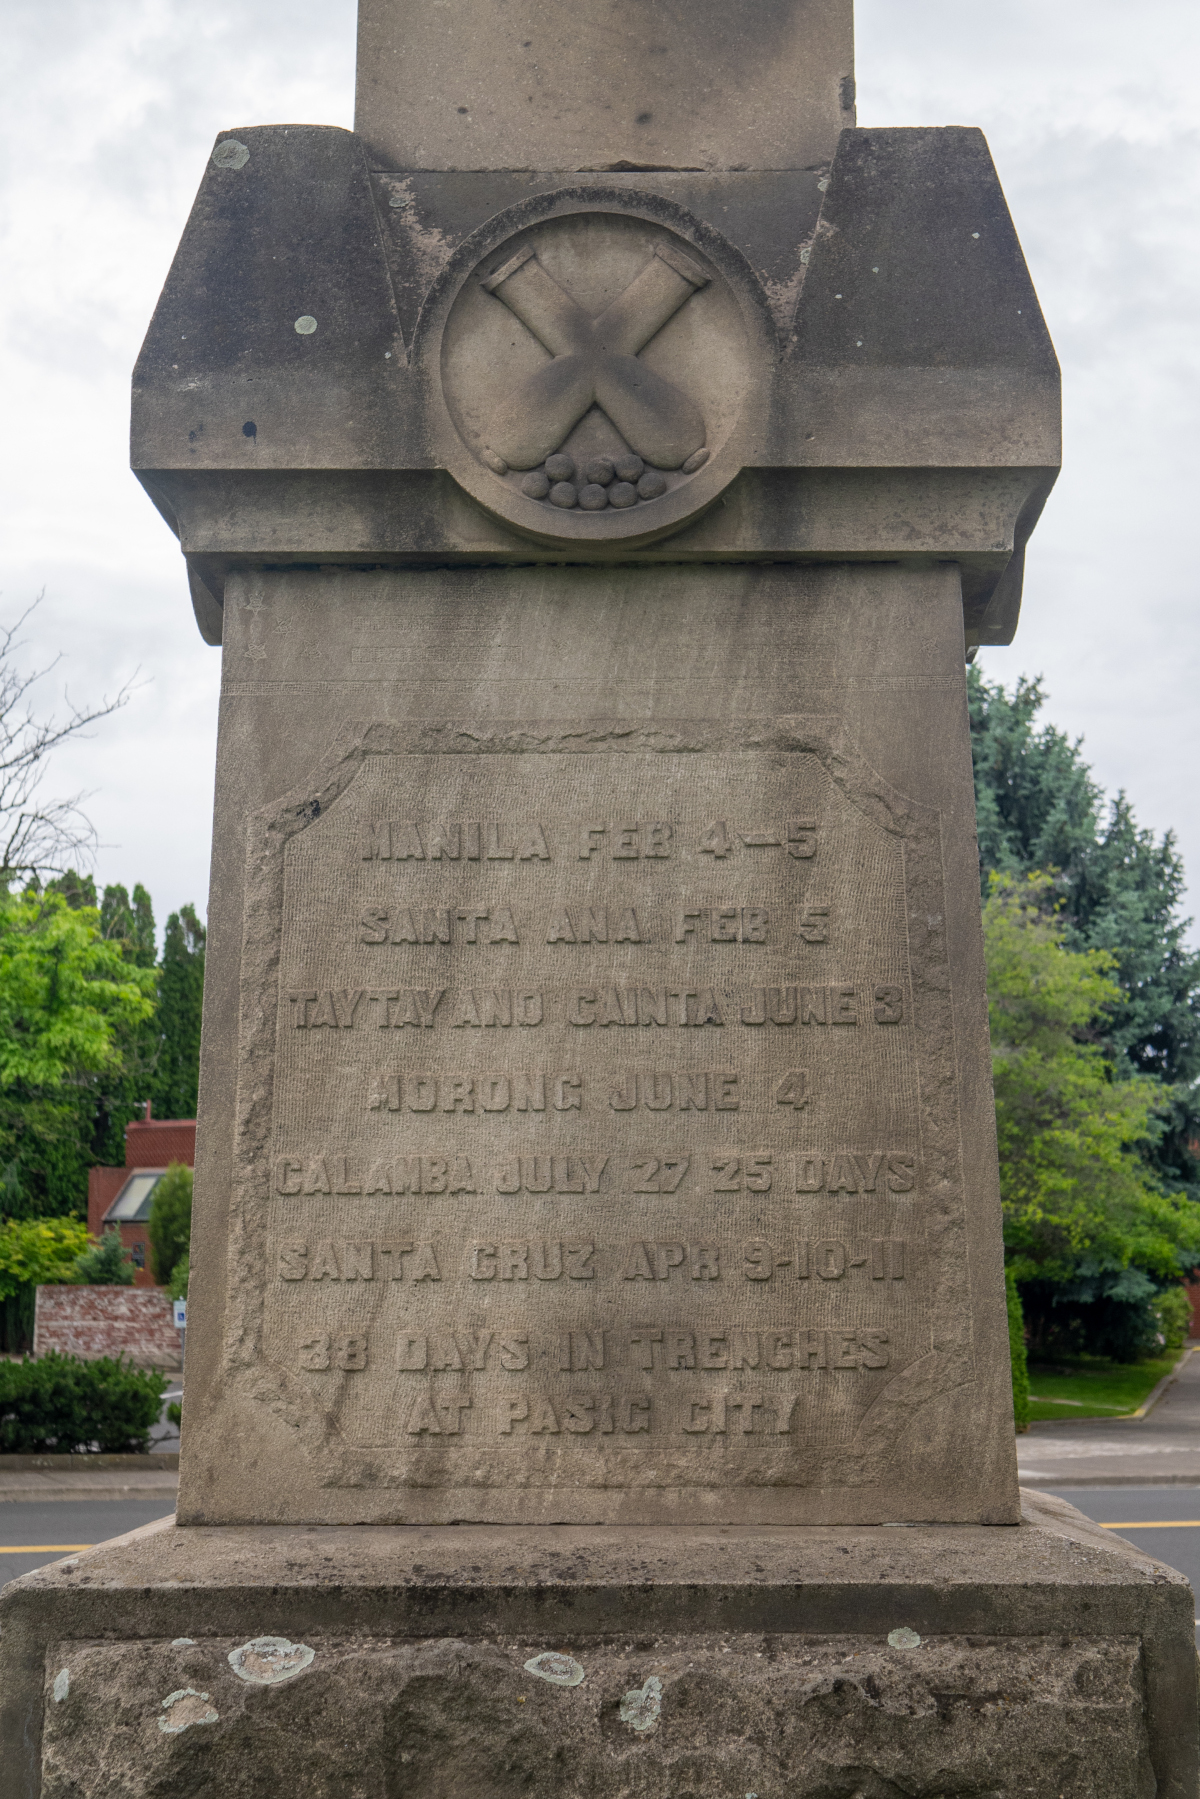 Detail of the inscription on the right side of the monument, with the dates and places of battles that Company I fought in during the Philippine War. An inscription below this declares that the unit was “204 DAYS ON FIRING LINE.”